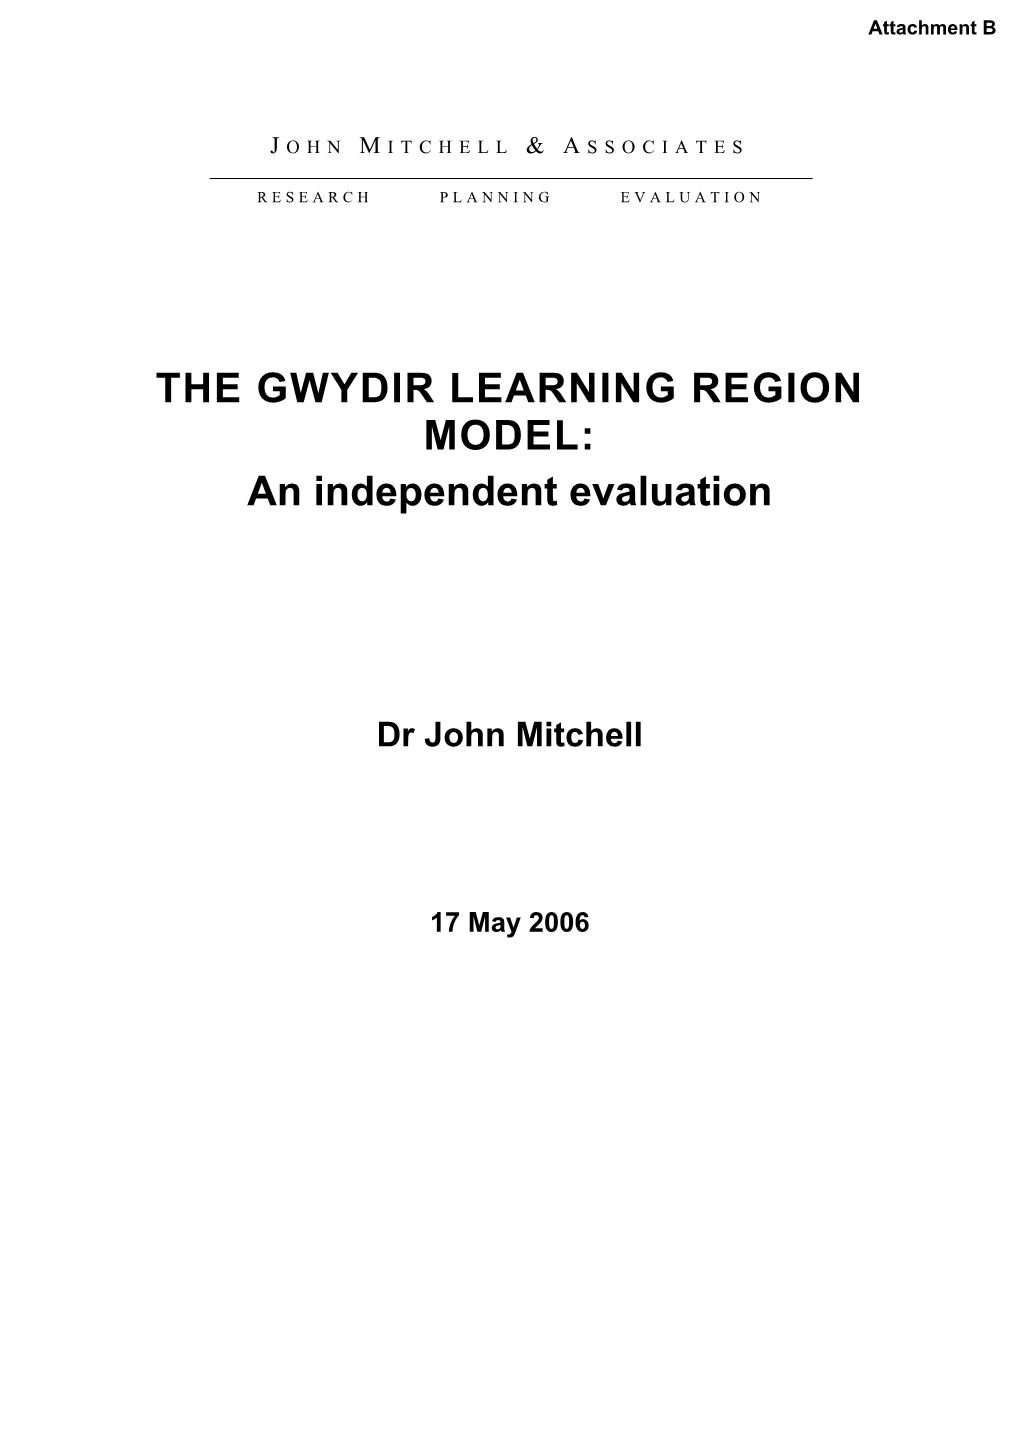 THE GWYDIR LEARNING REGION MODEL: an Independent Evaluation